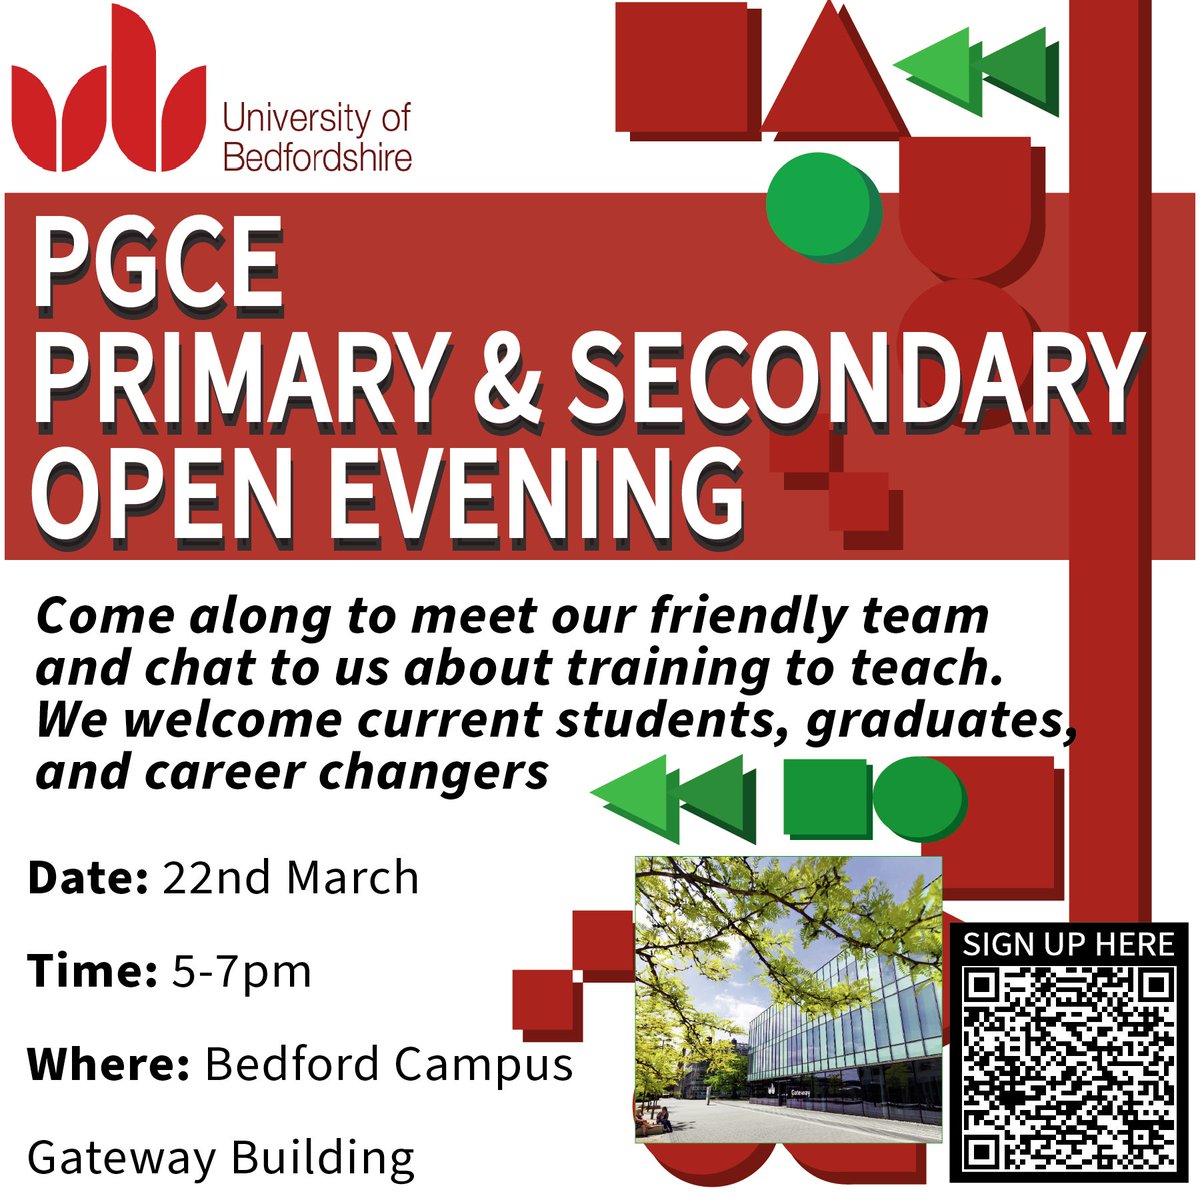 Open evening this week at University of Bedofrdshire, not to late to pop along for a chat. We enjoy talking to future colleagues even if your not ready to join this academic year #teaching #getintoteaching #teach #bedfordshire #schooldirect #graduates #undergraduates #Careers